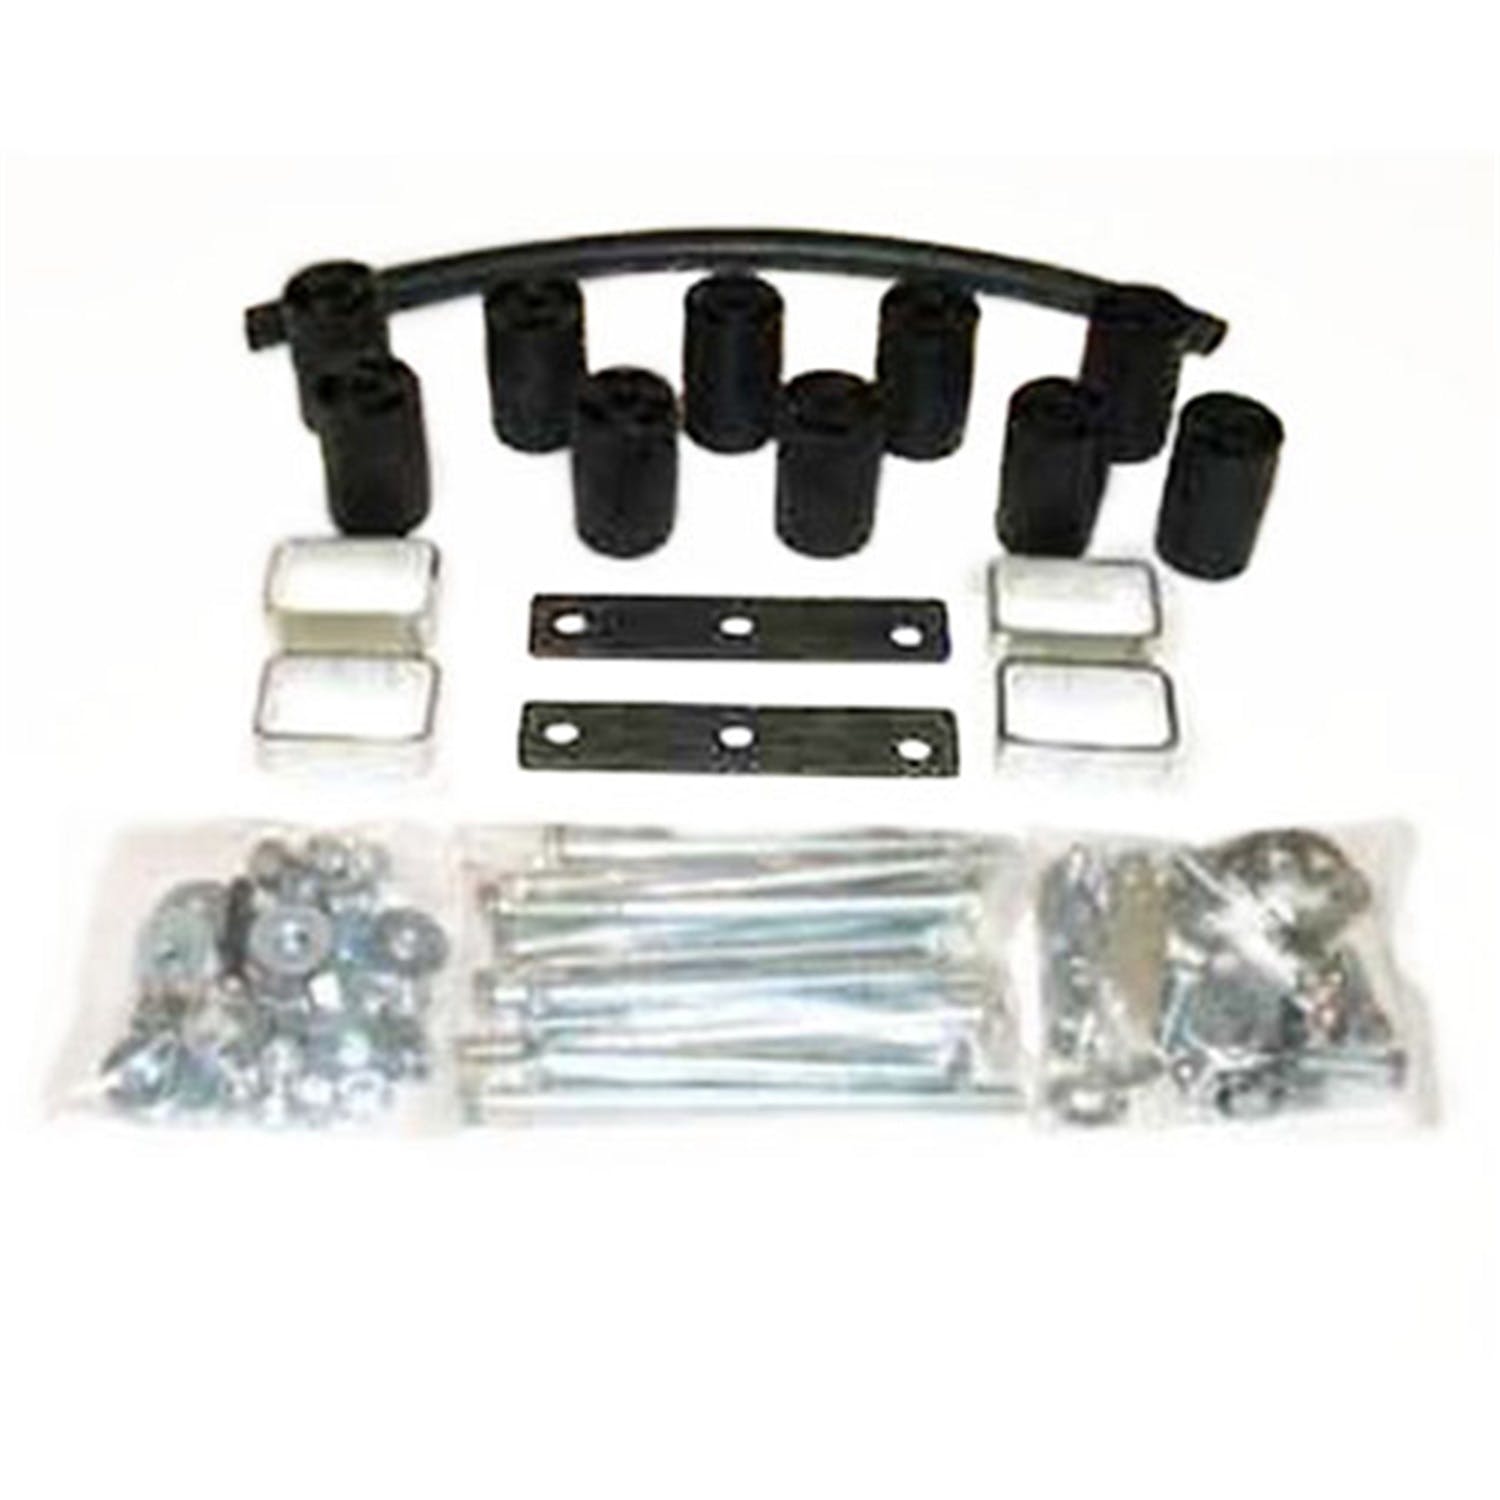 Performance Accessories PA5083 Body Lift Kit 3 inch